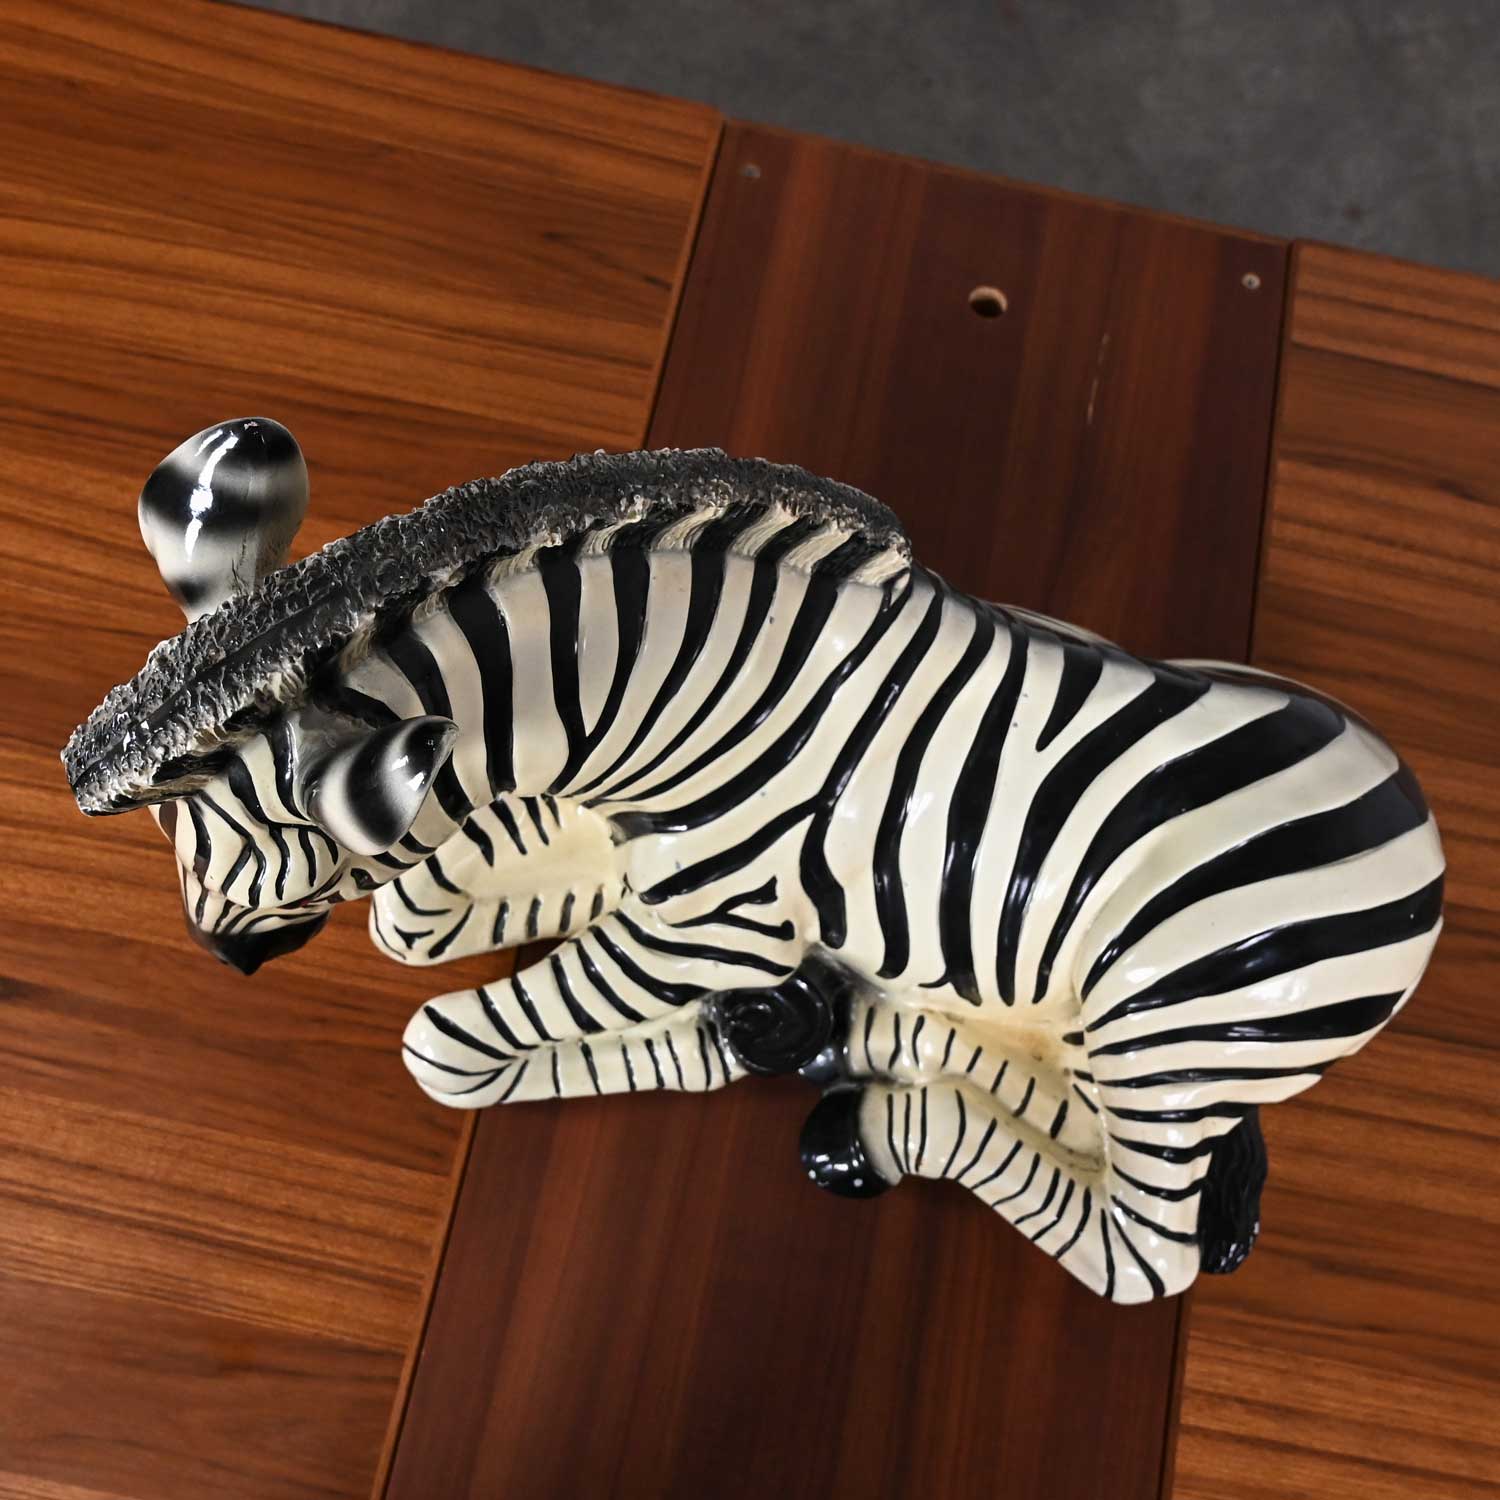 1970’s Marwal Industries Large Scale Zebra Molded Resin Statue or Sculpture